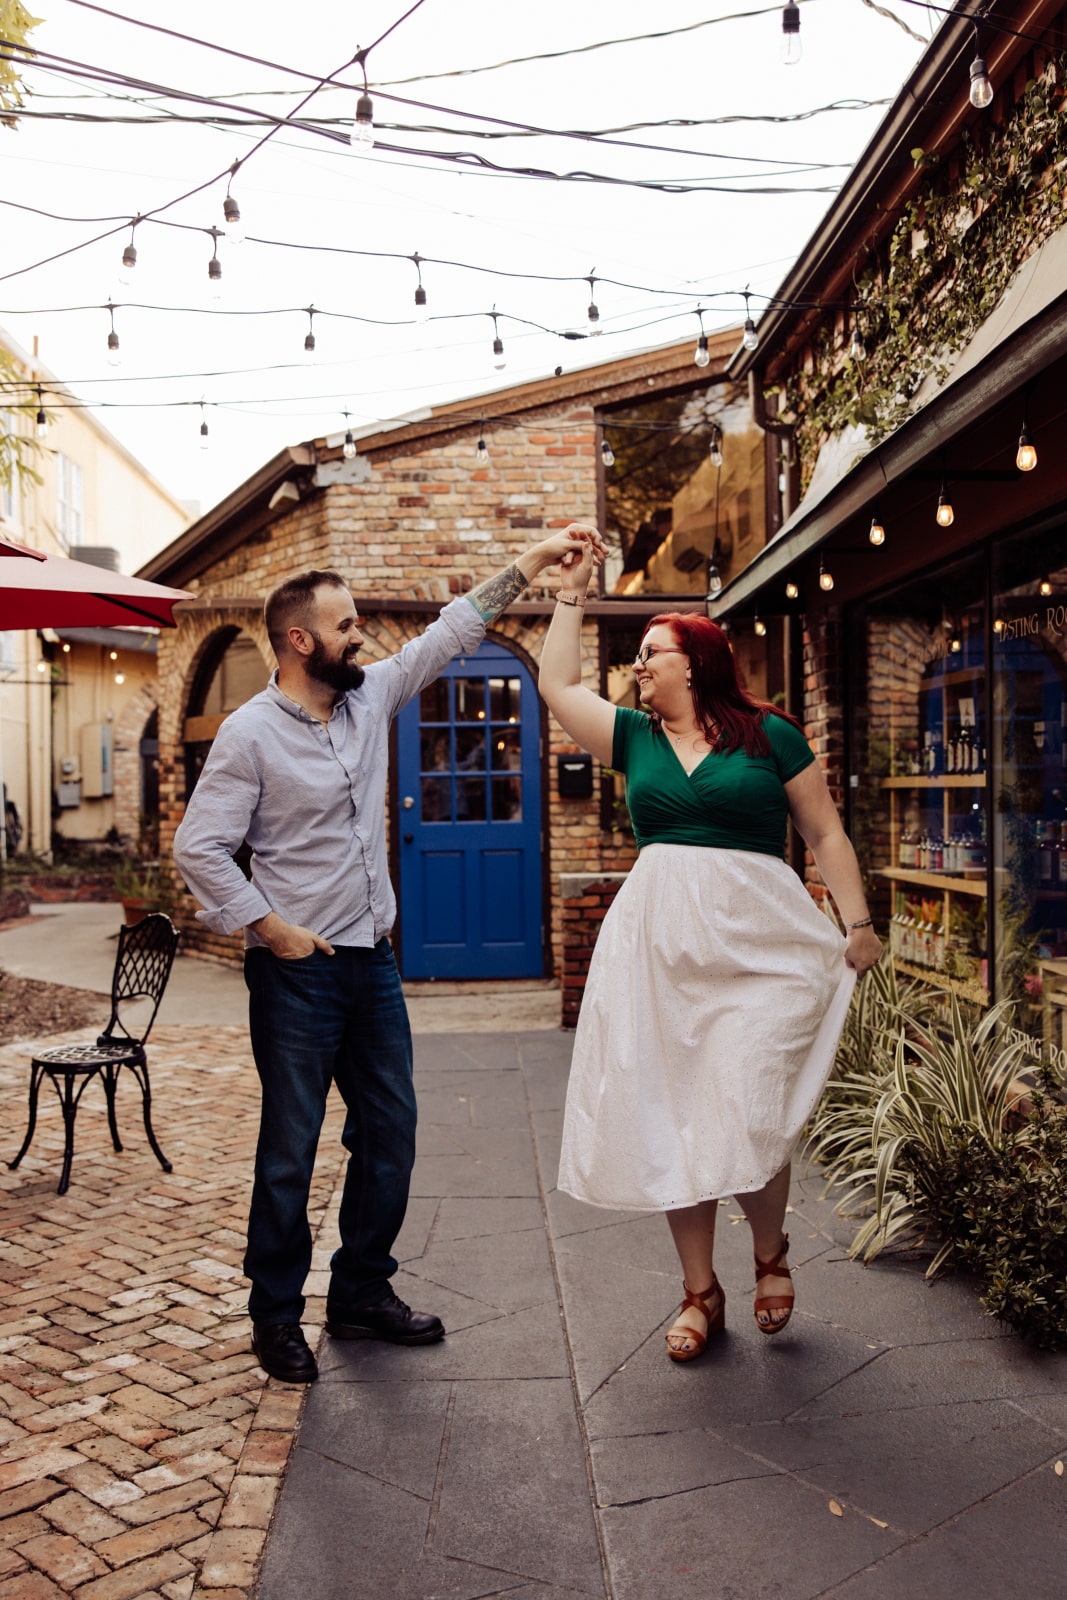 man spins woman in outdoor courtyard with market lighting overheard